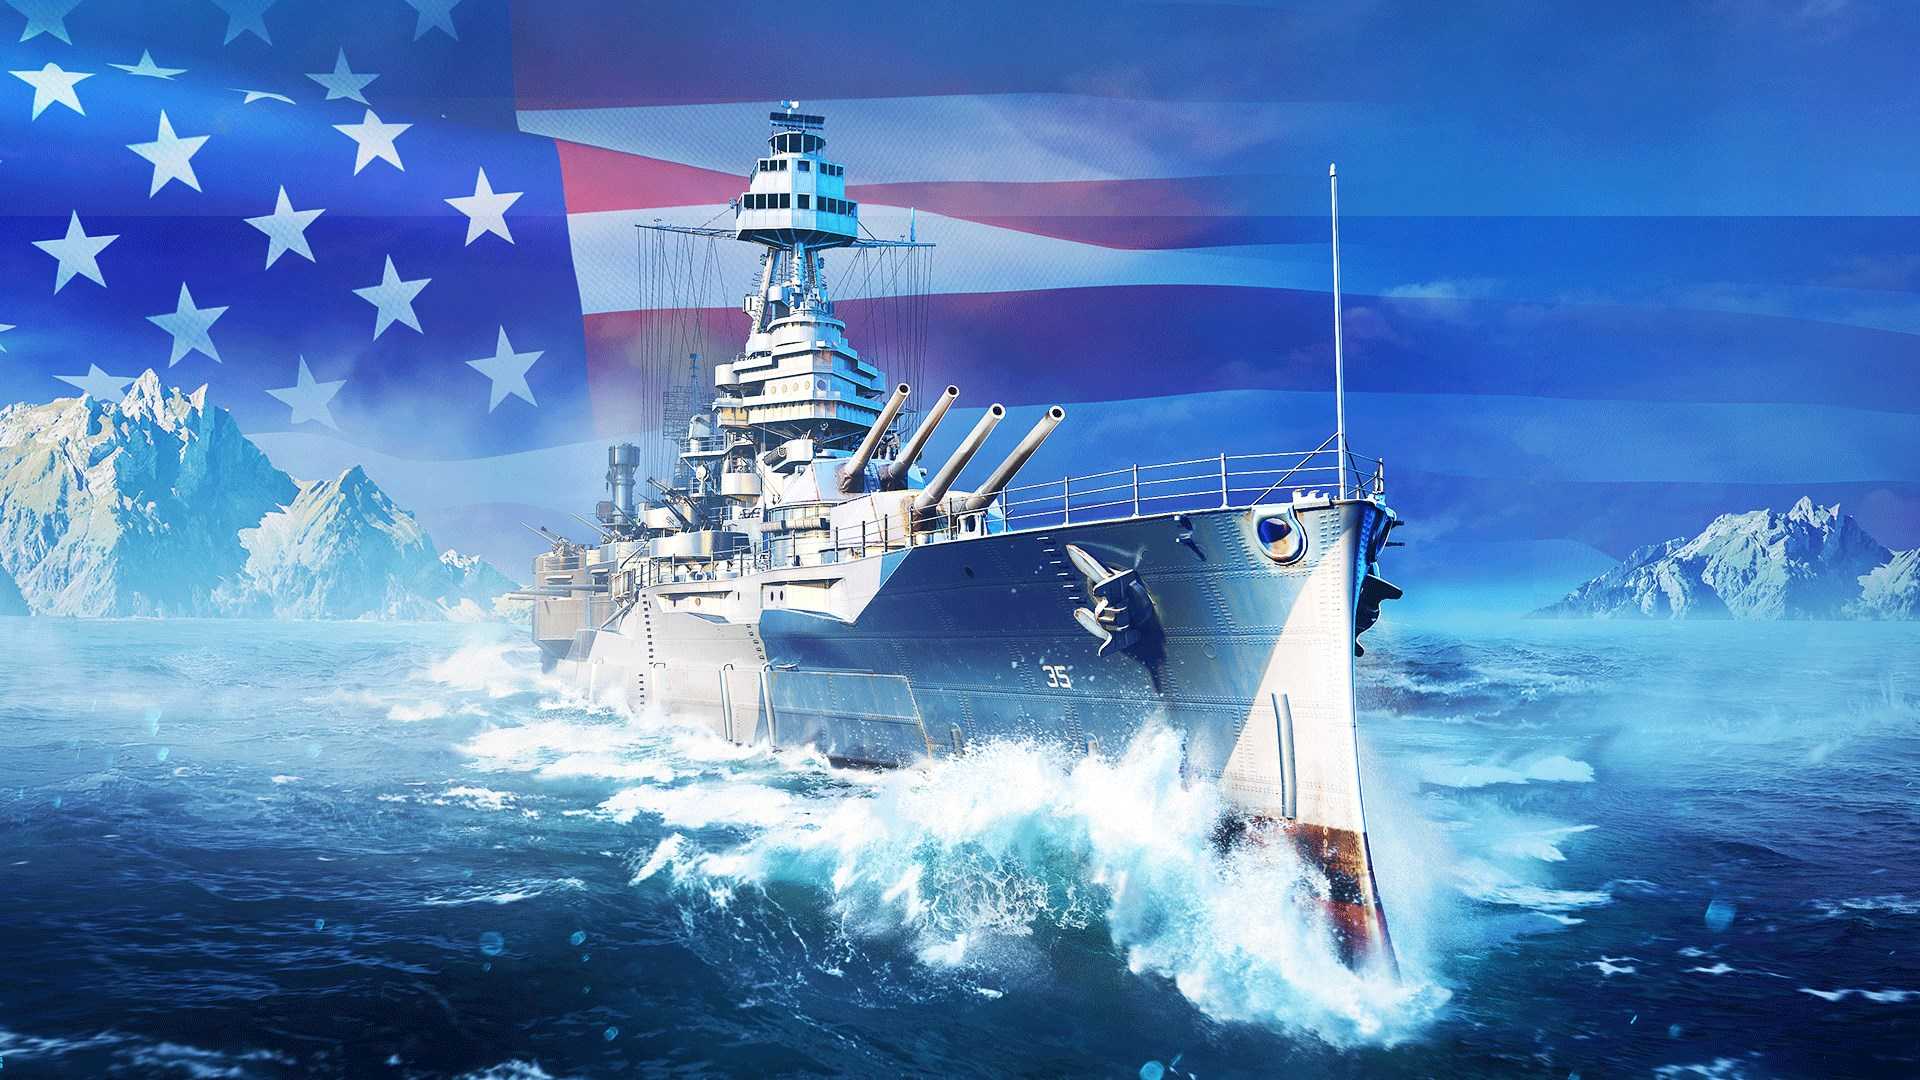 xbox store world of warships legends